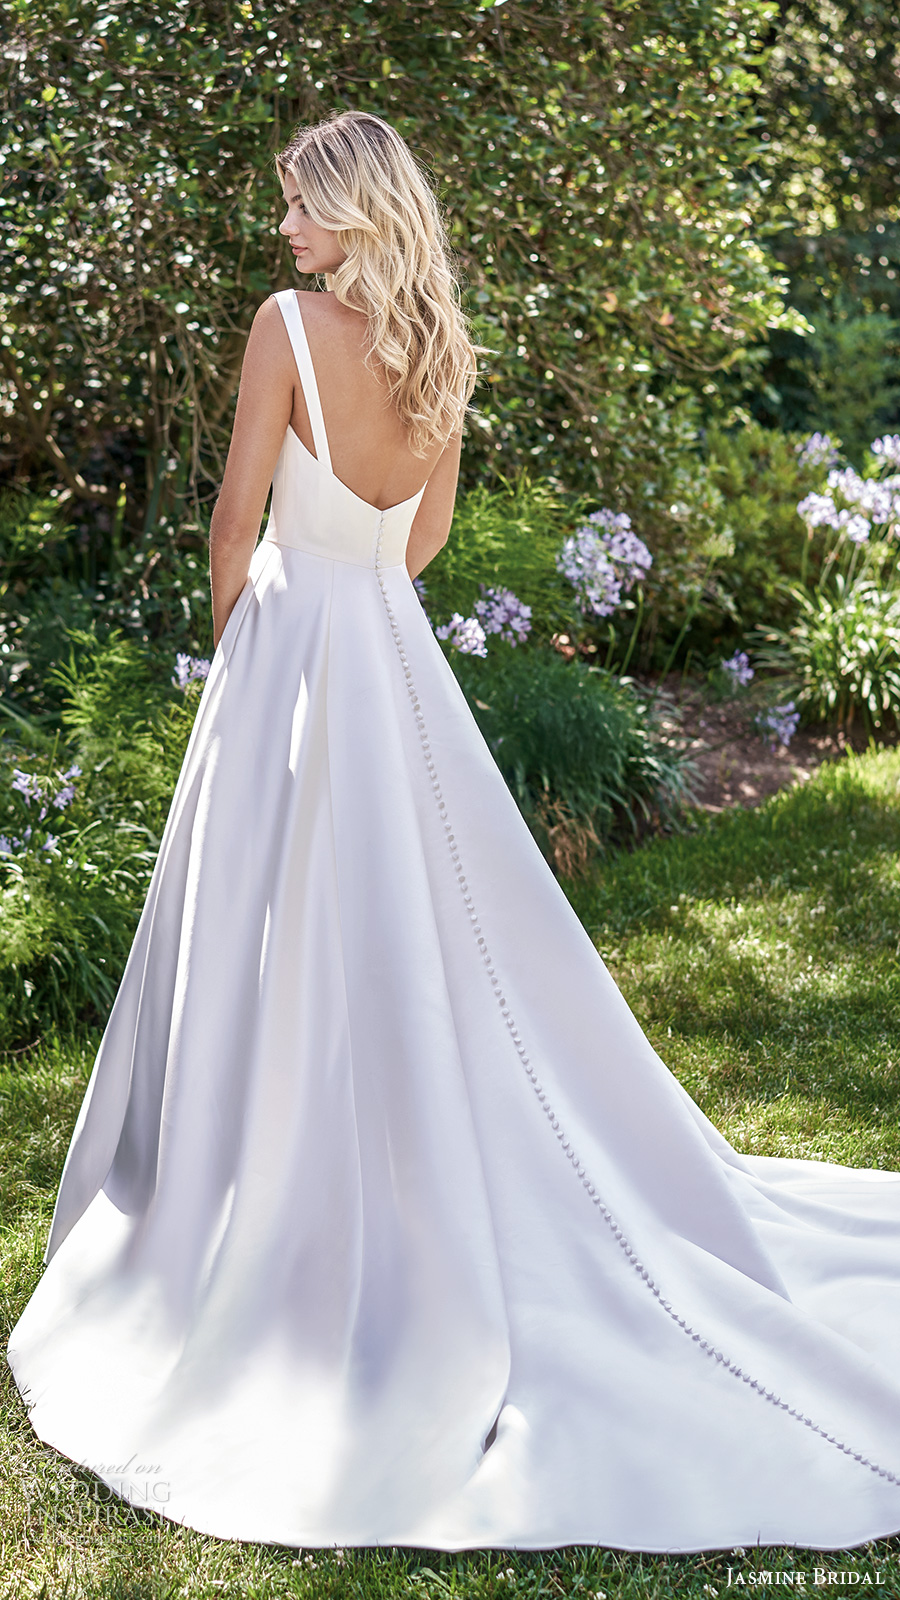 jasmine spring 2020 collection sleeveless thick straps plunging v neckline clean minimalist a line ball gown wedding dress chapel train (12) bv